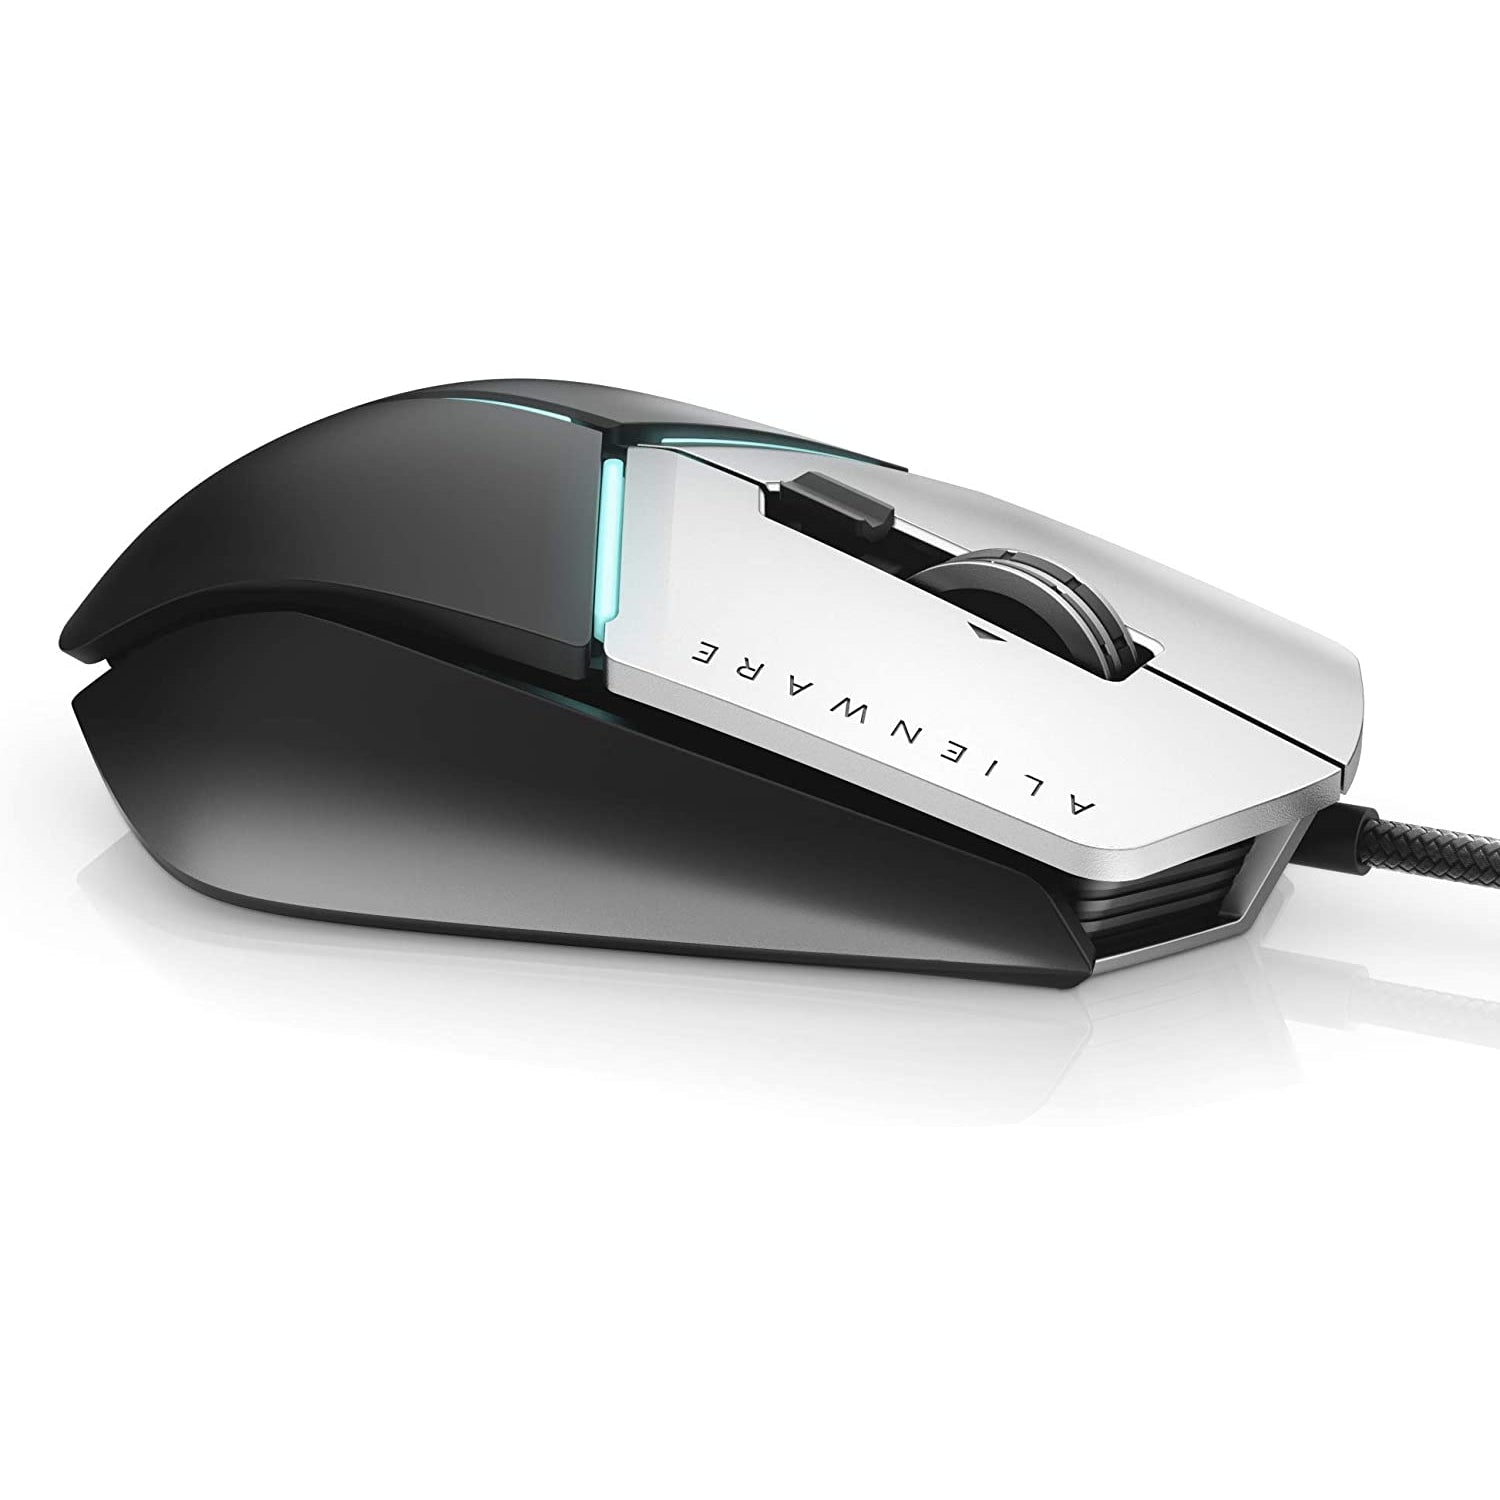 Alienware AW959 Elite Gaming Mouse